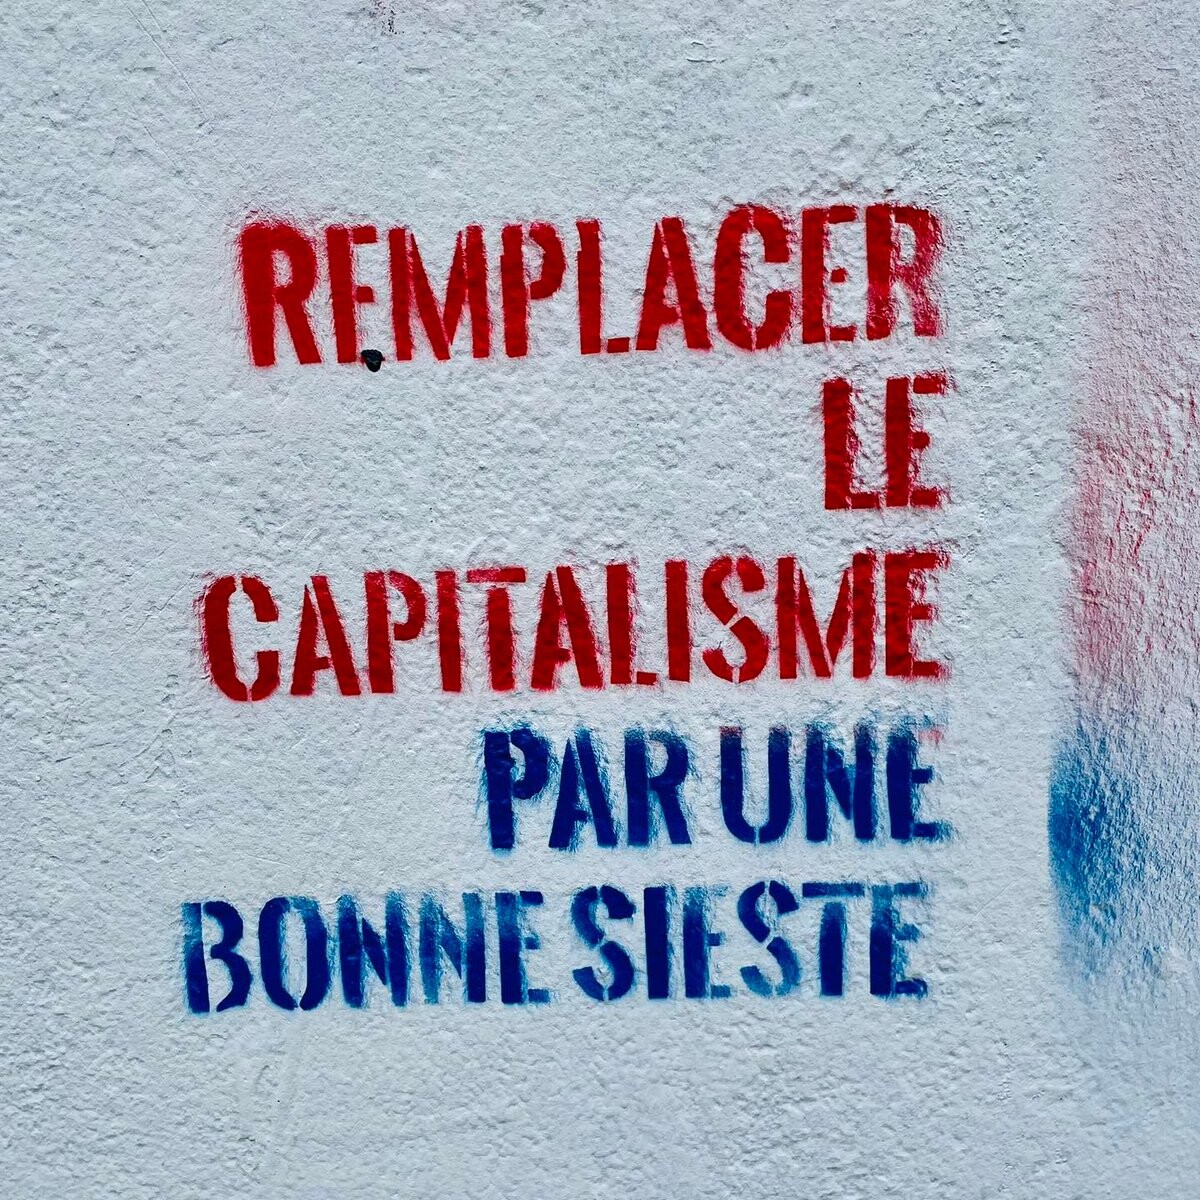 Red and blue stencil on a wall that says "Replace capitalism with a good nap" in French 